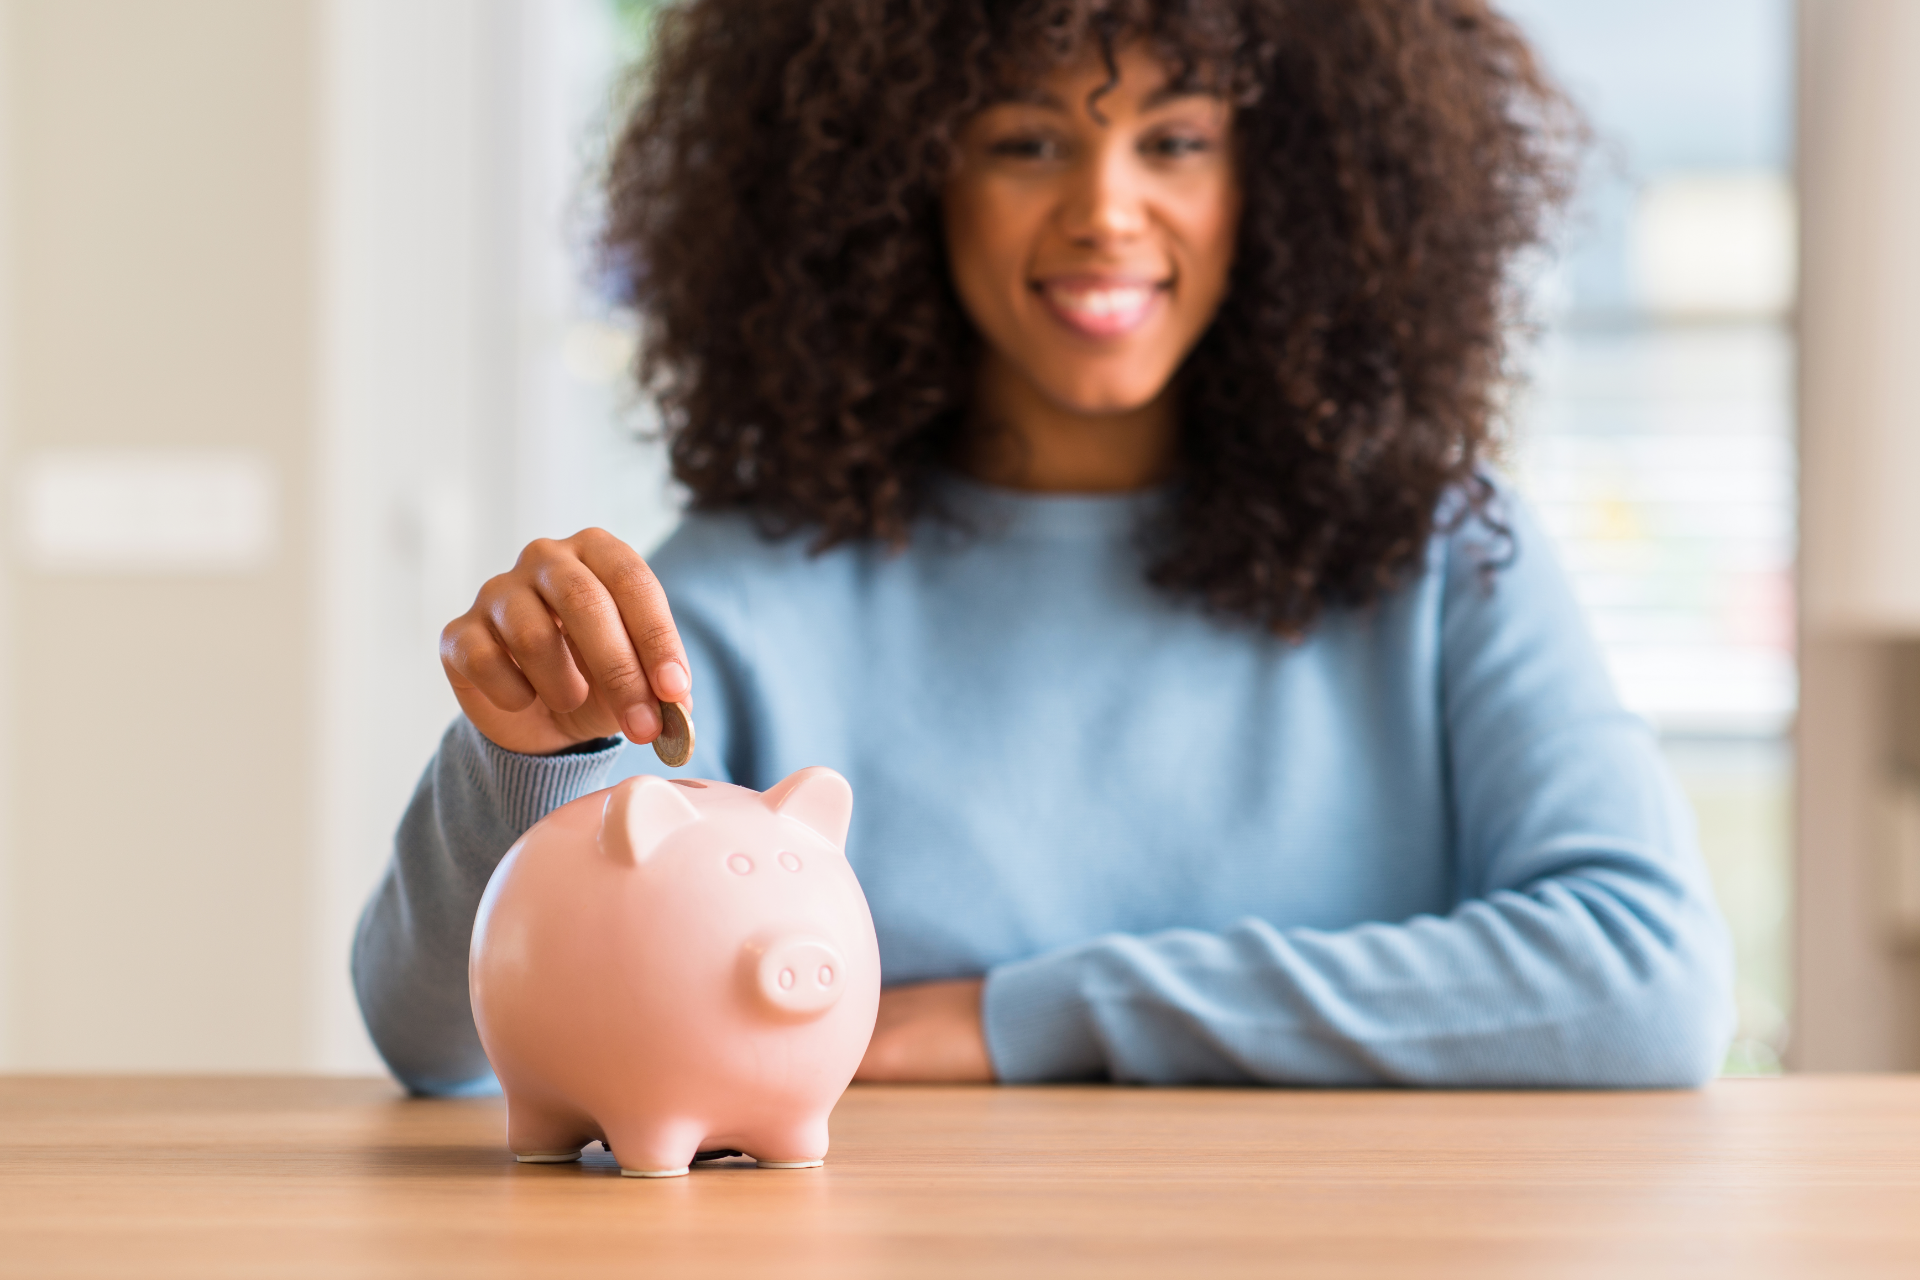 Choosing a savings system that works for you